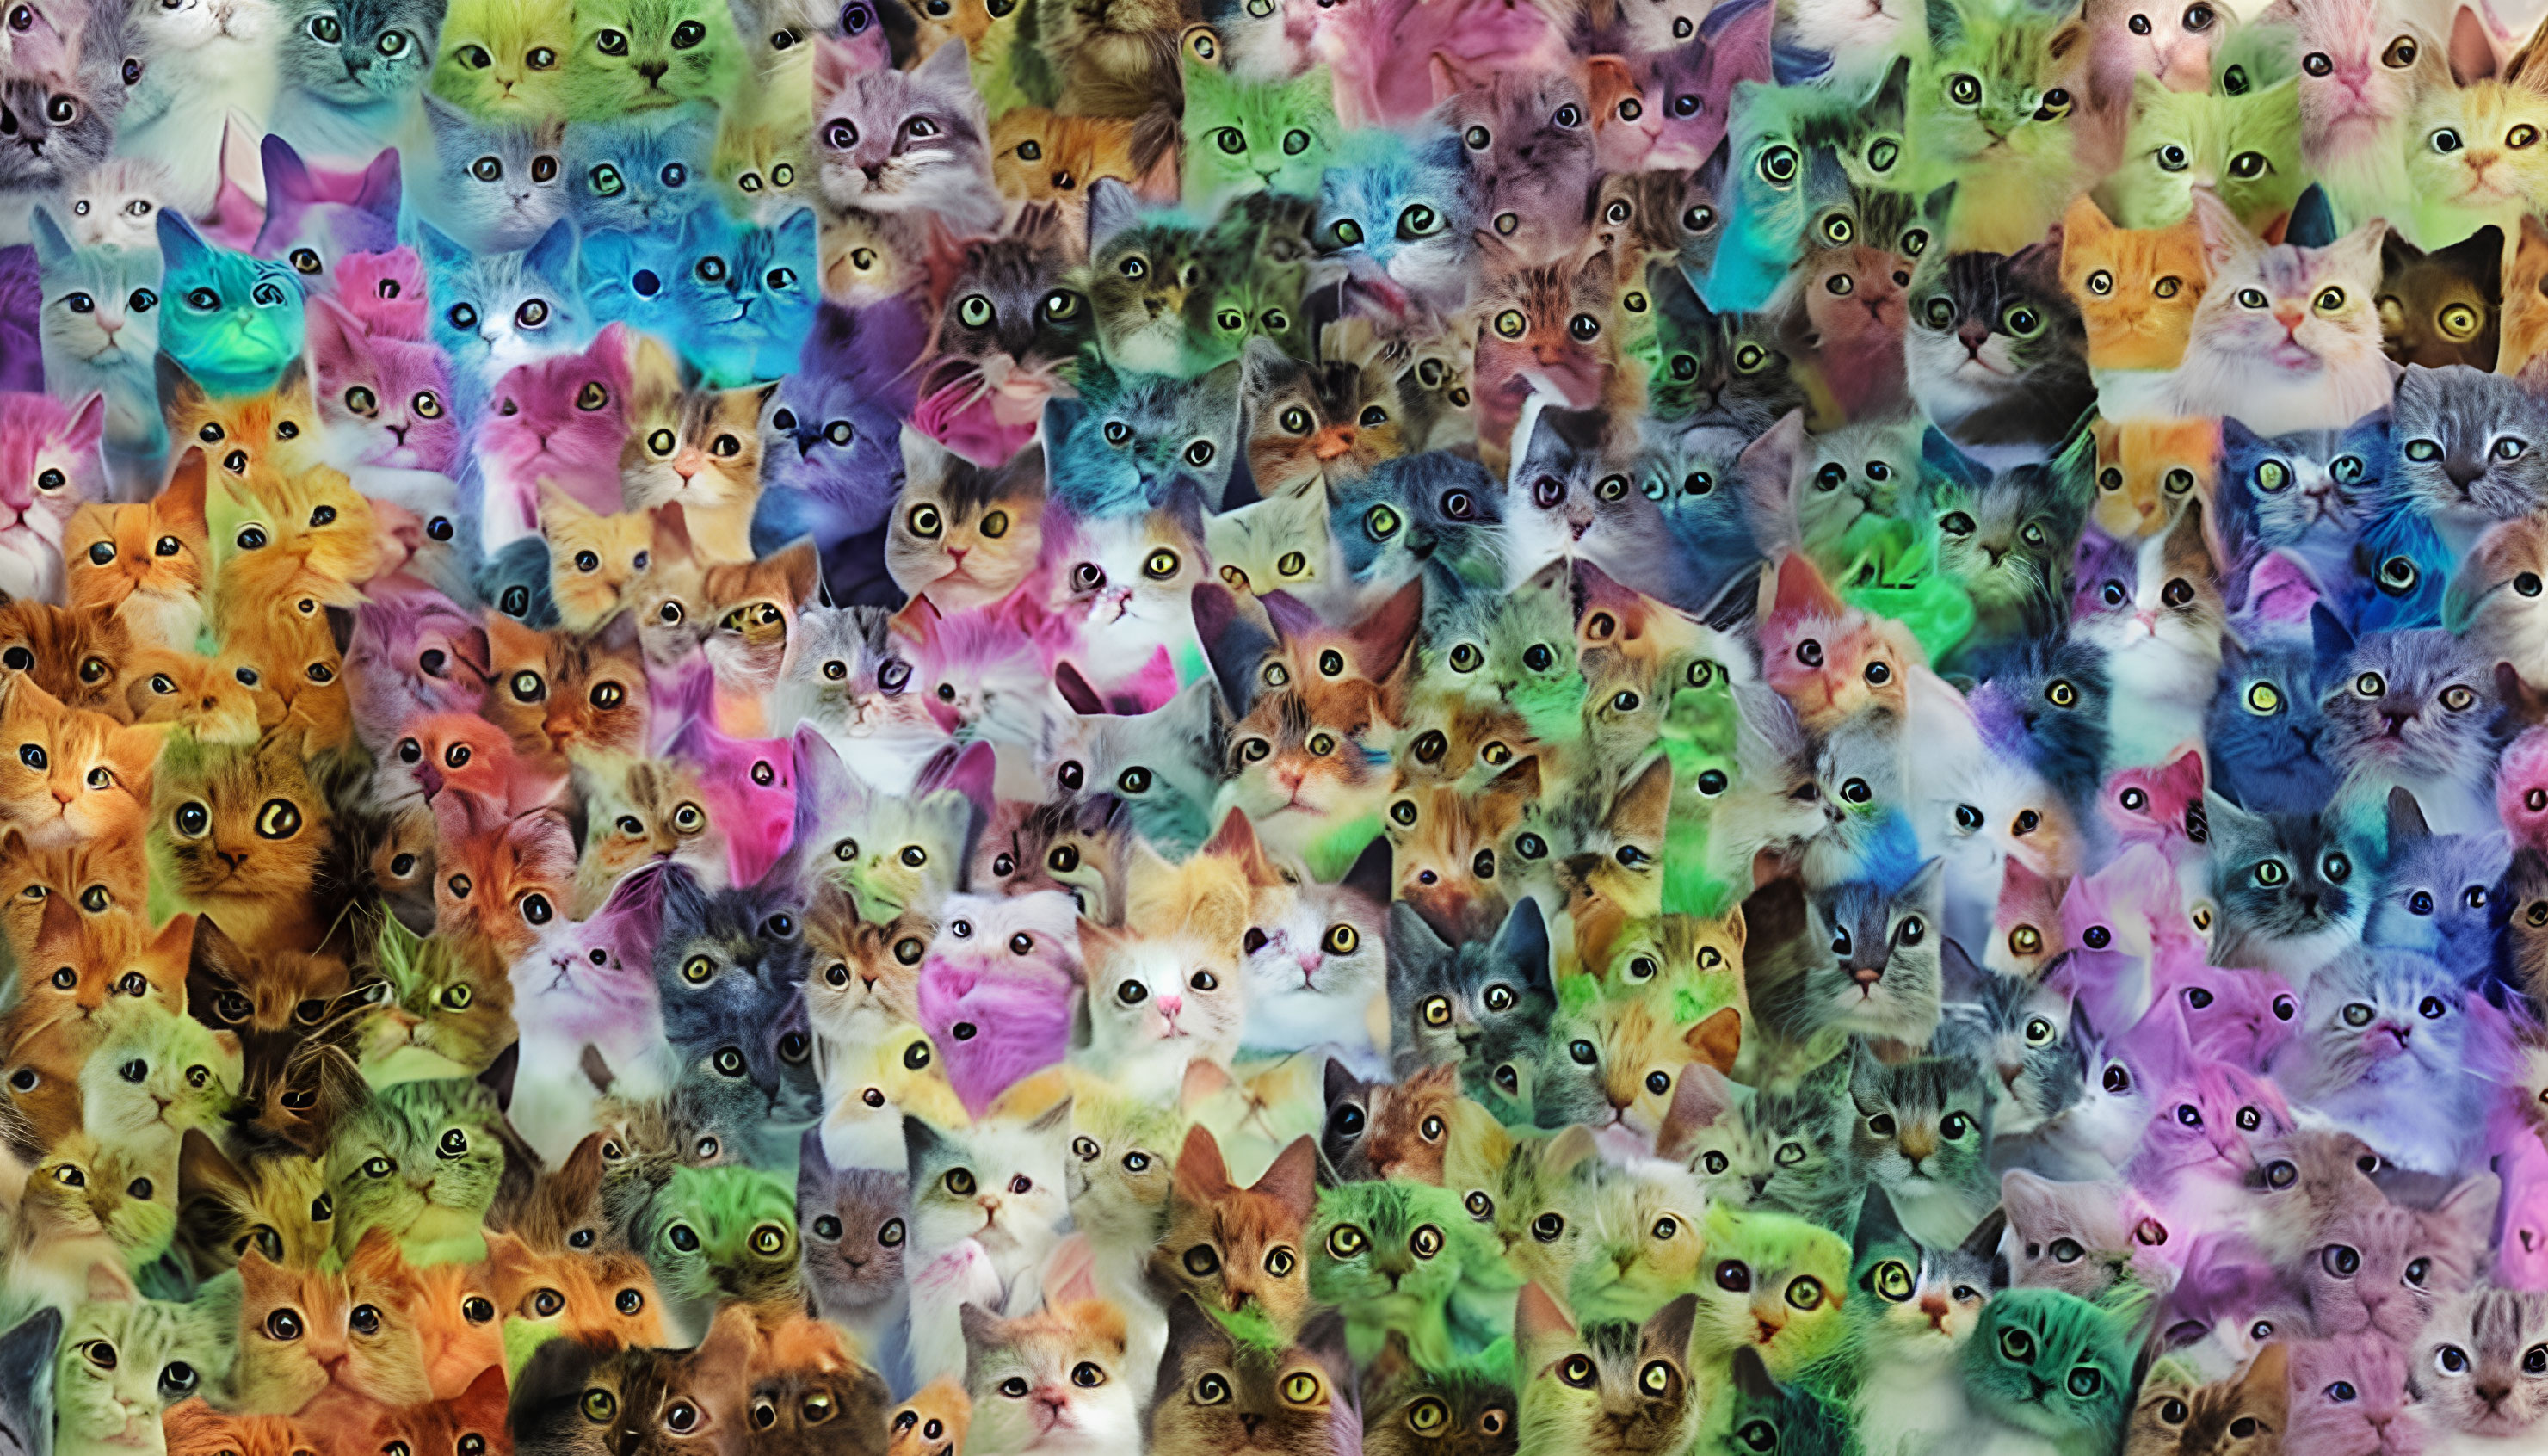 Colorful Collage of Diverse Cat Faces in Various Expressions